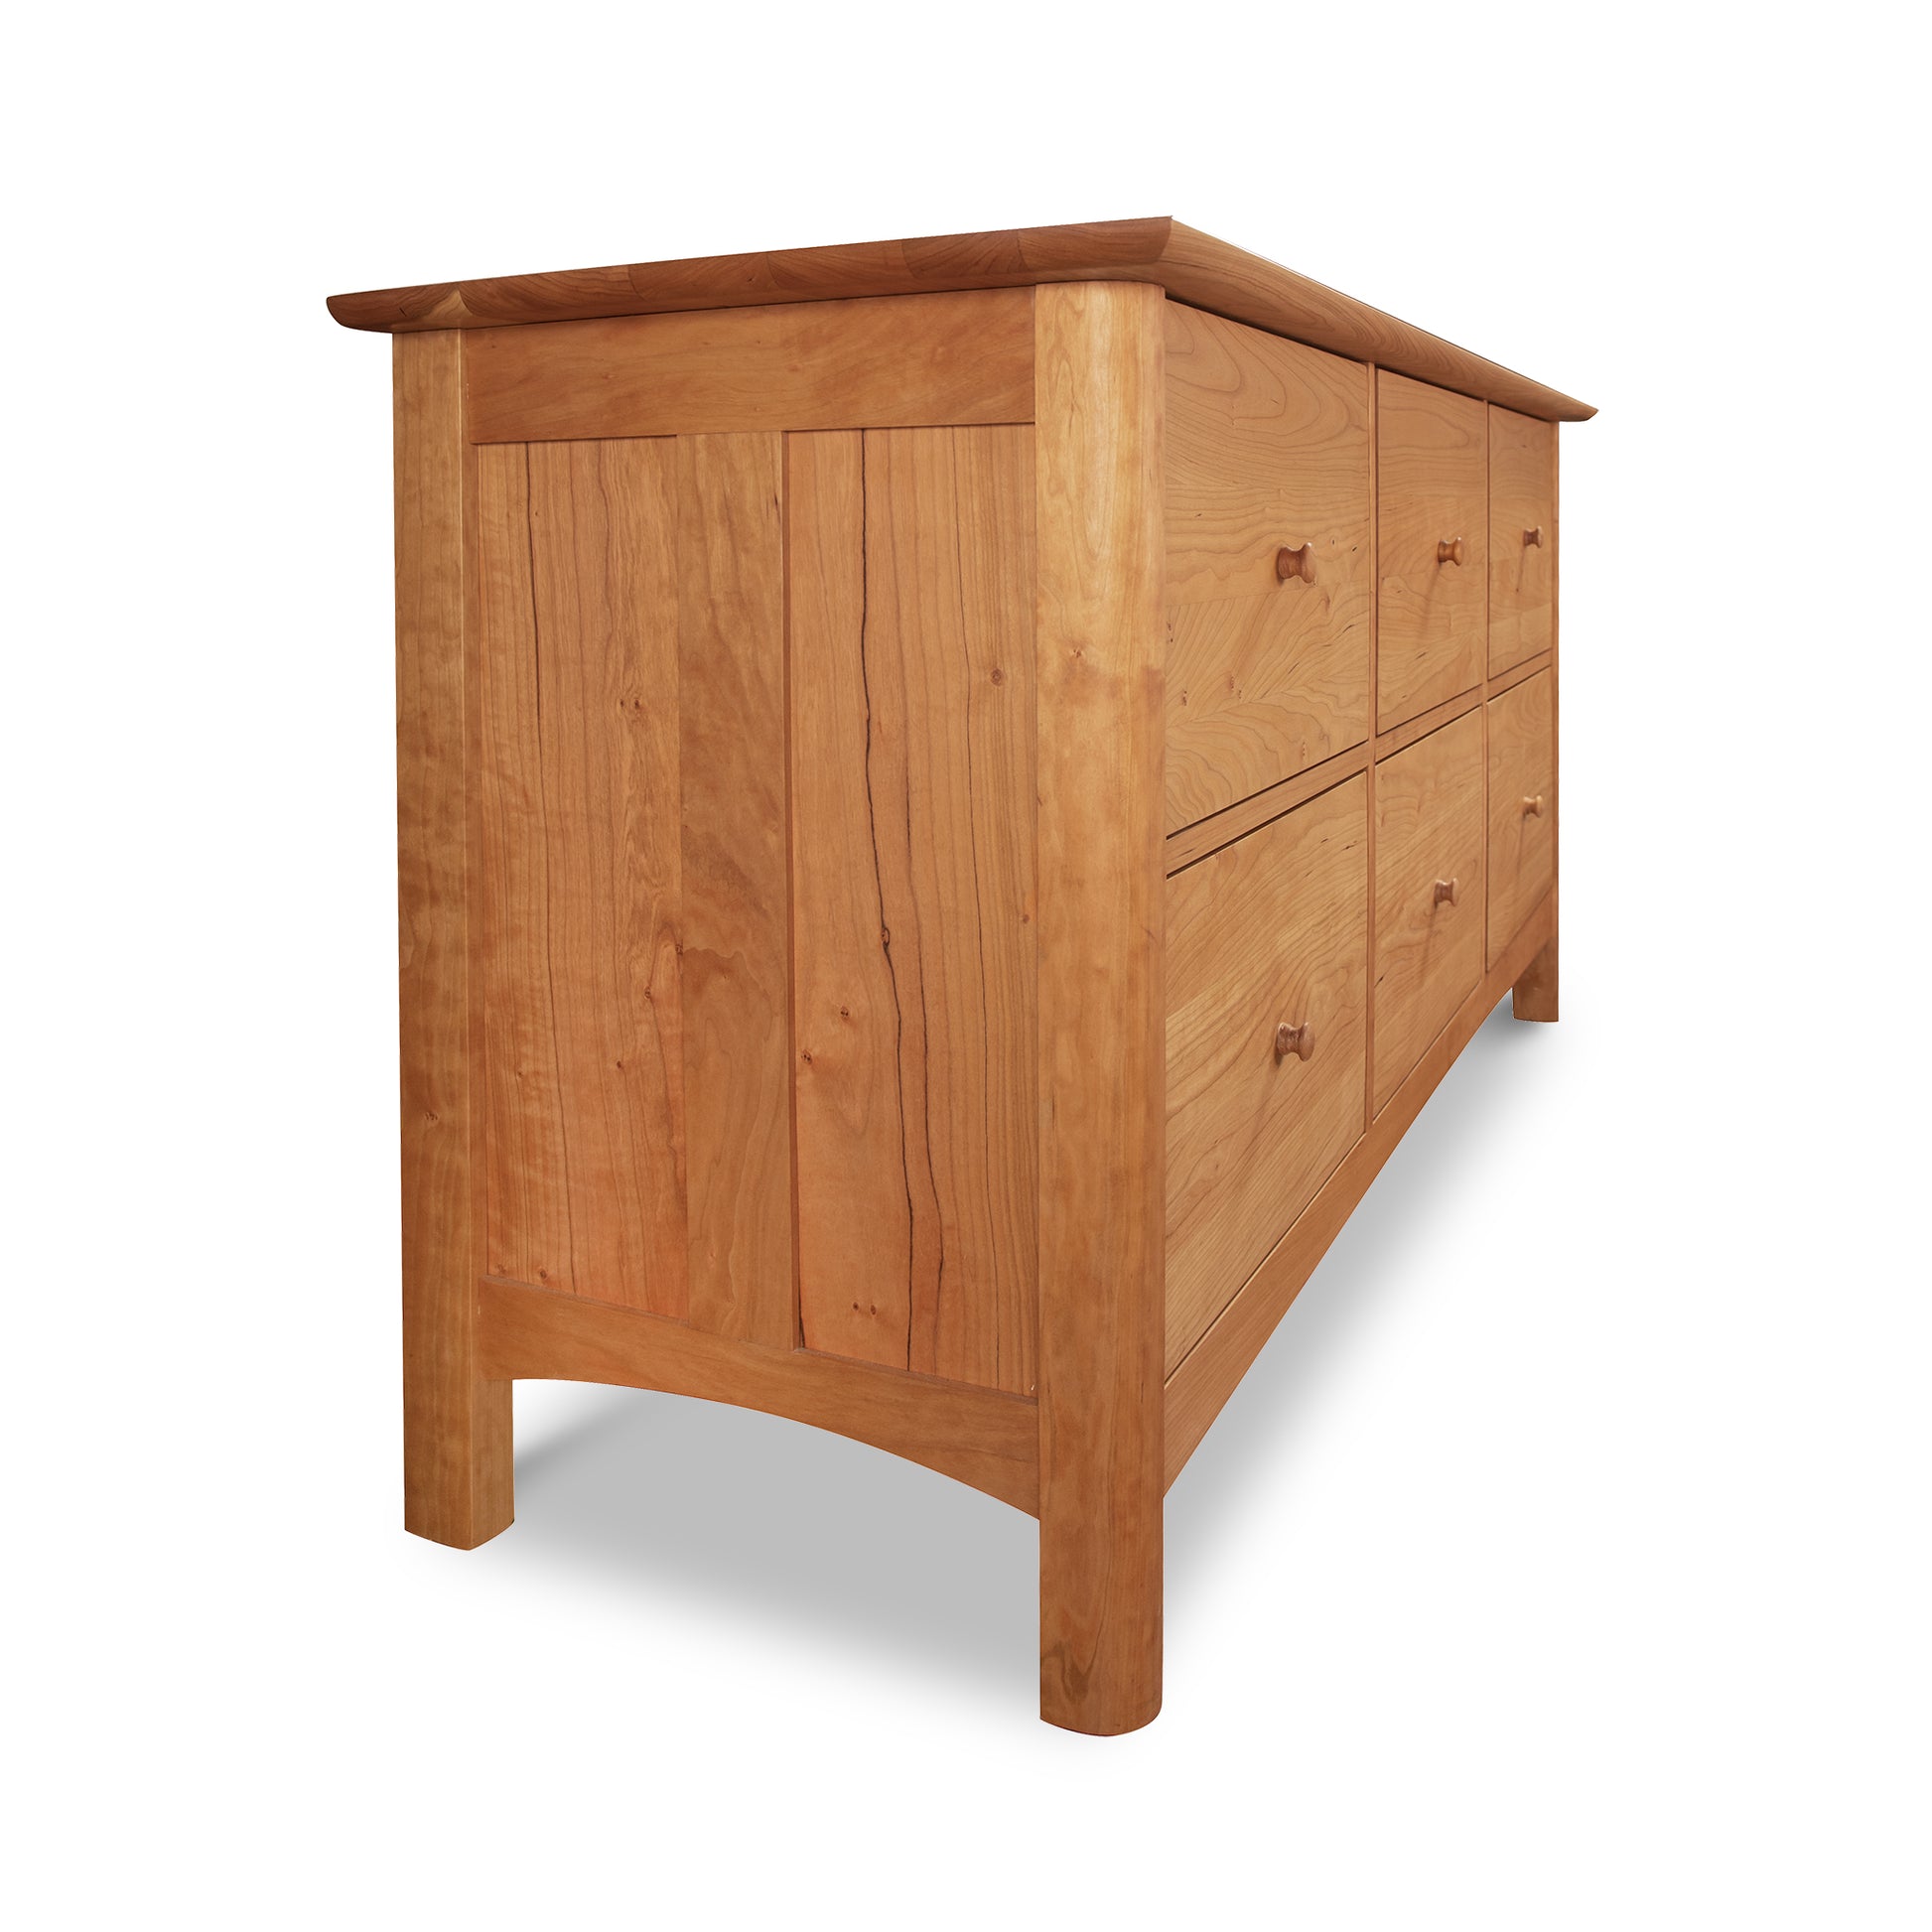 A Vermont Furniture Designs Heartwood Shaker 6-Drawer Legal File Cabinet, isolated on a white background.